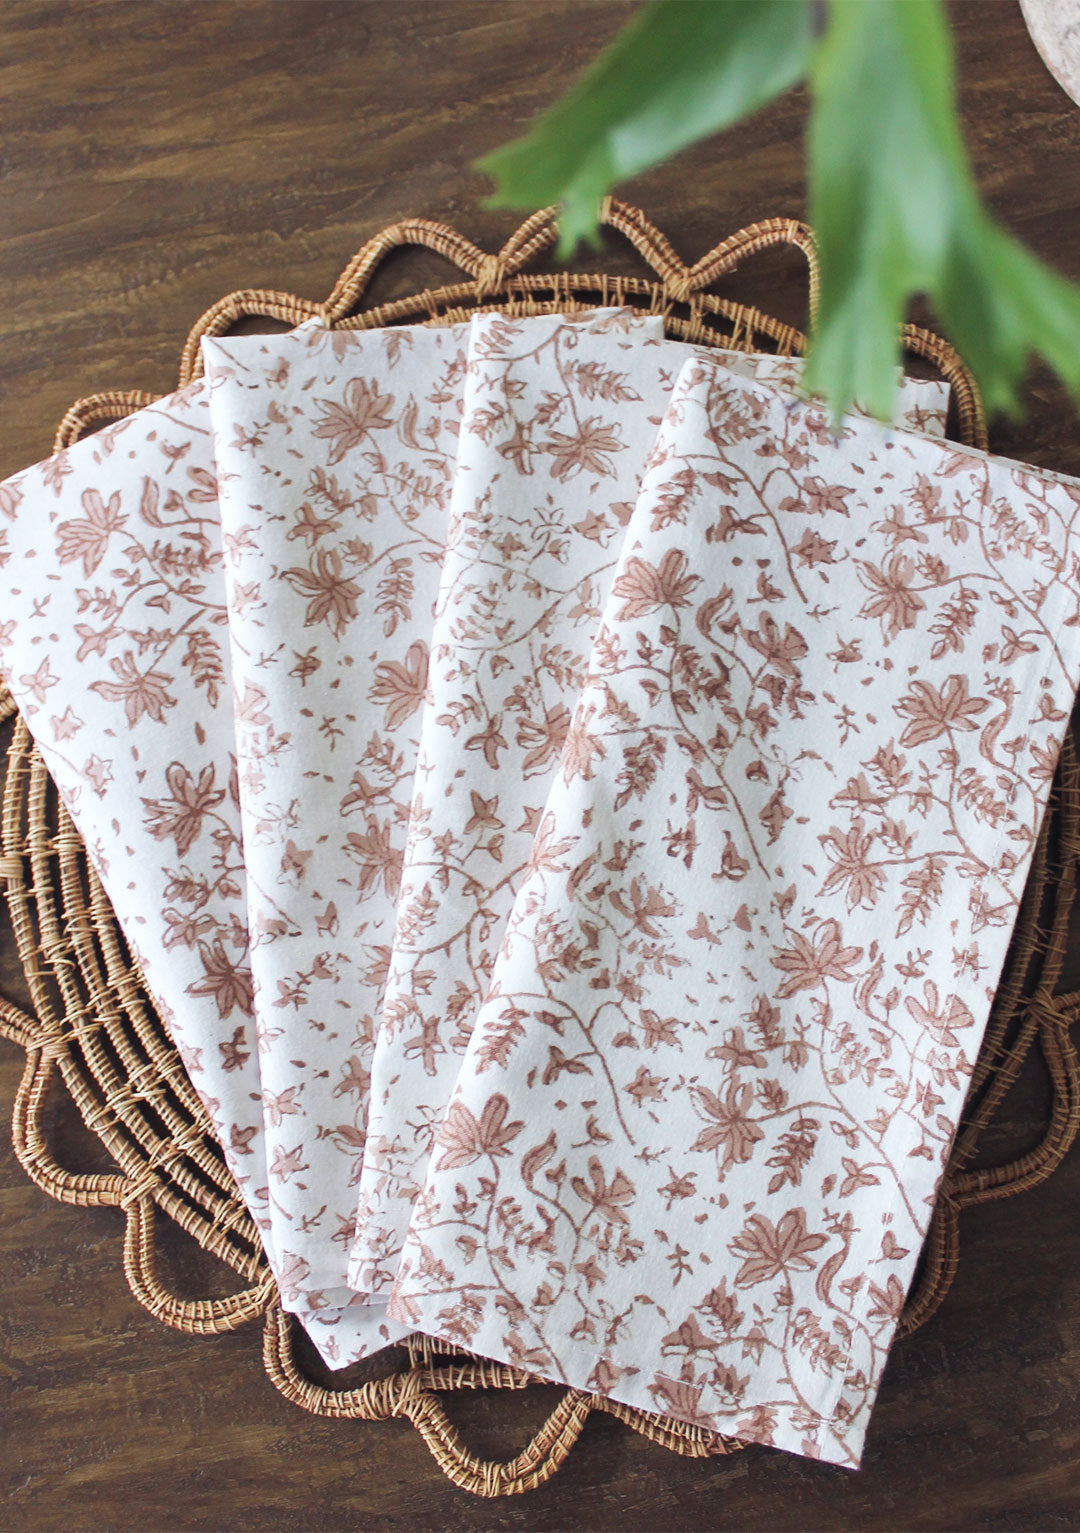 Whimsy Floral Napkins in Buckhorn Brown - Set of 4